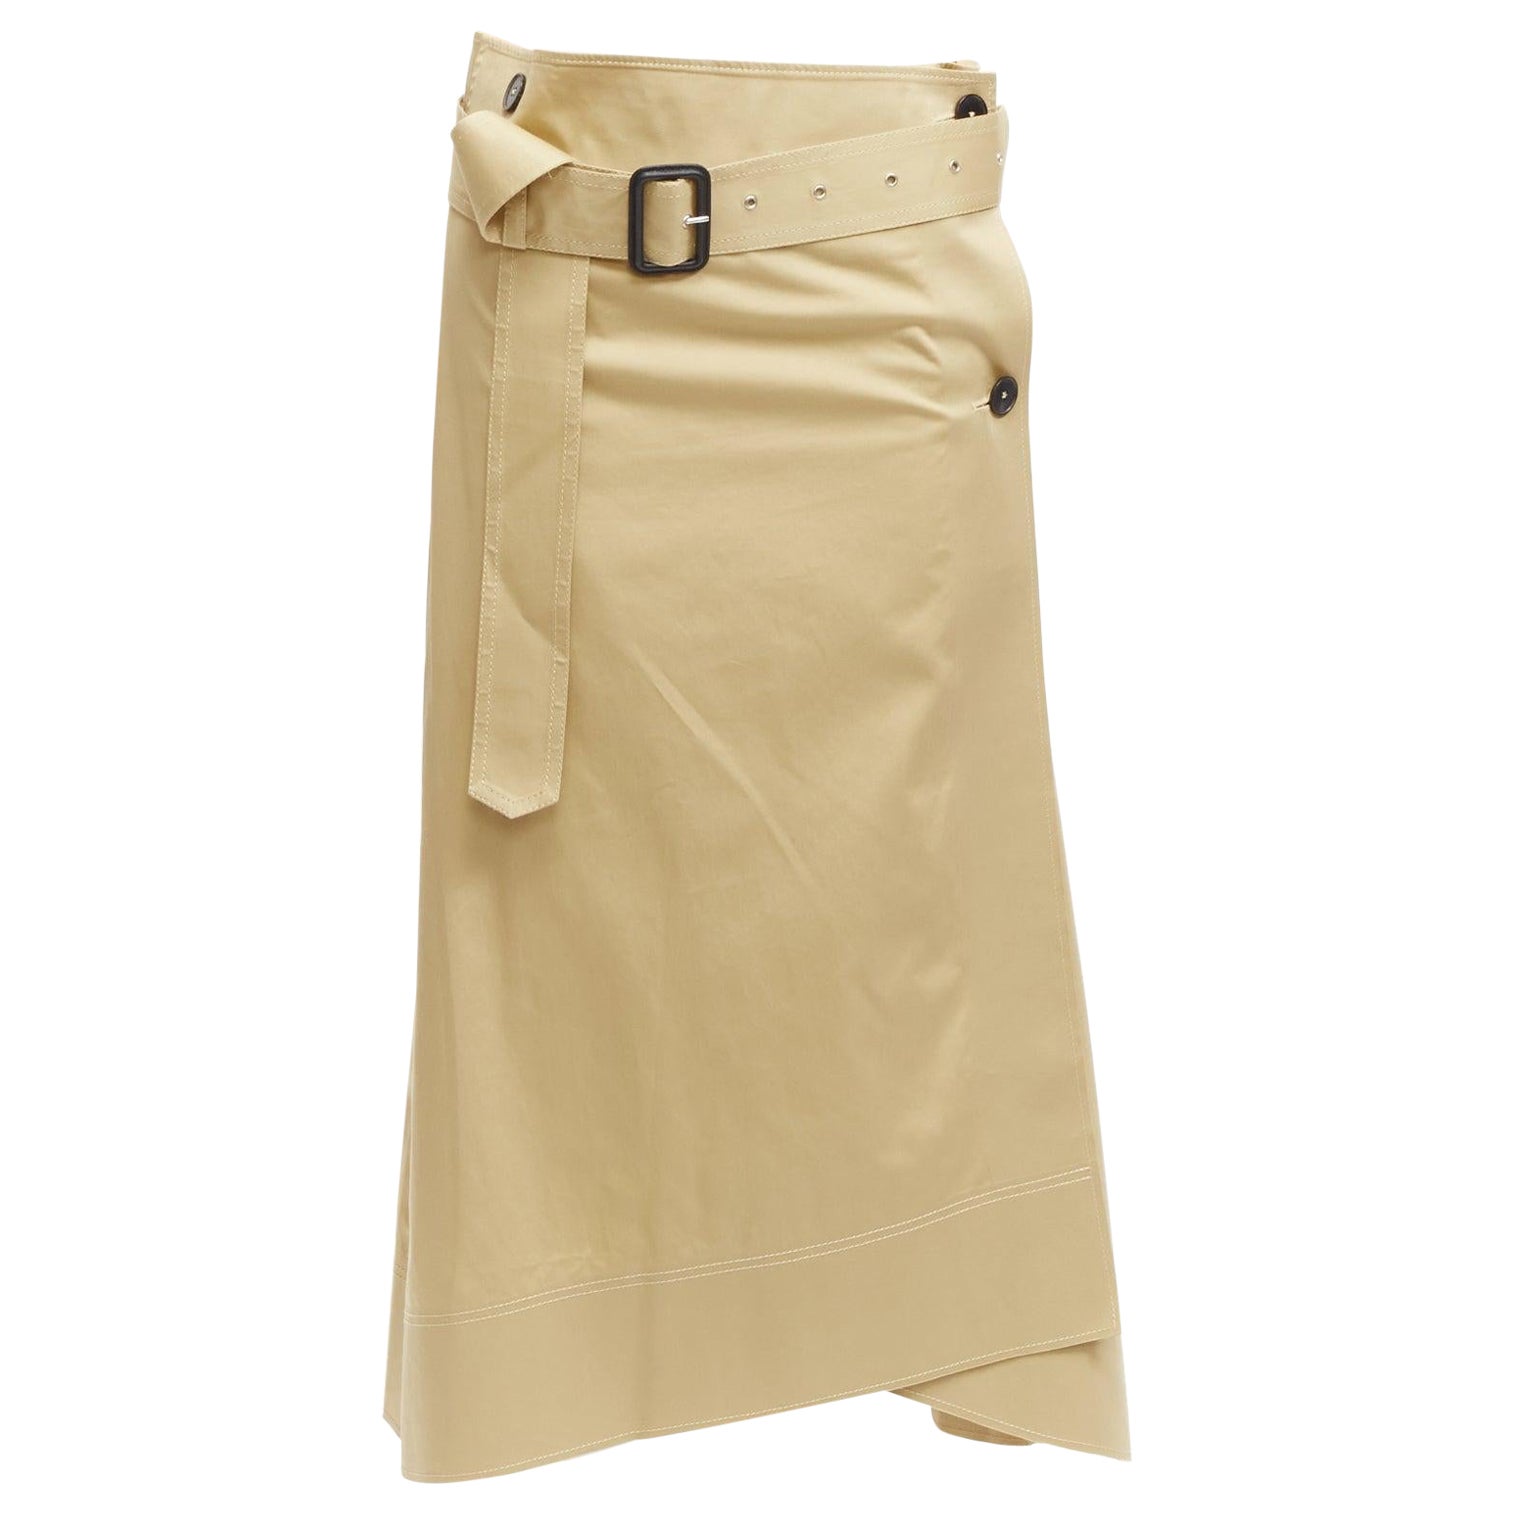 JOSEPH khaki cotton military safari belted trench inspired A-line wrap skirt For Sale